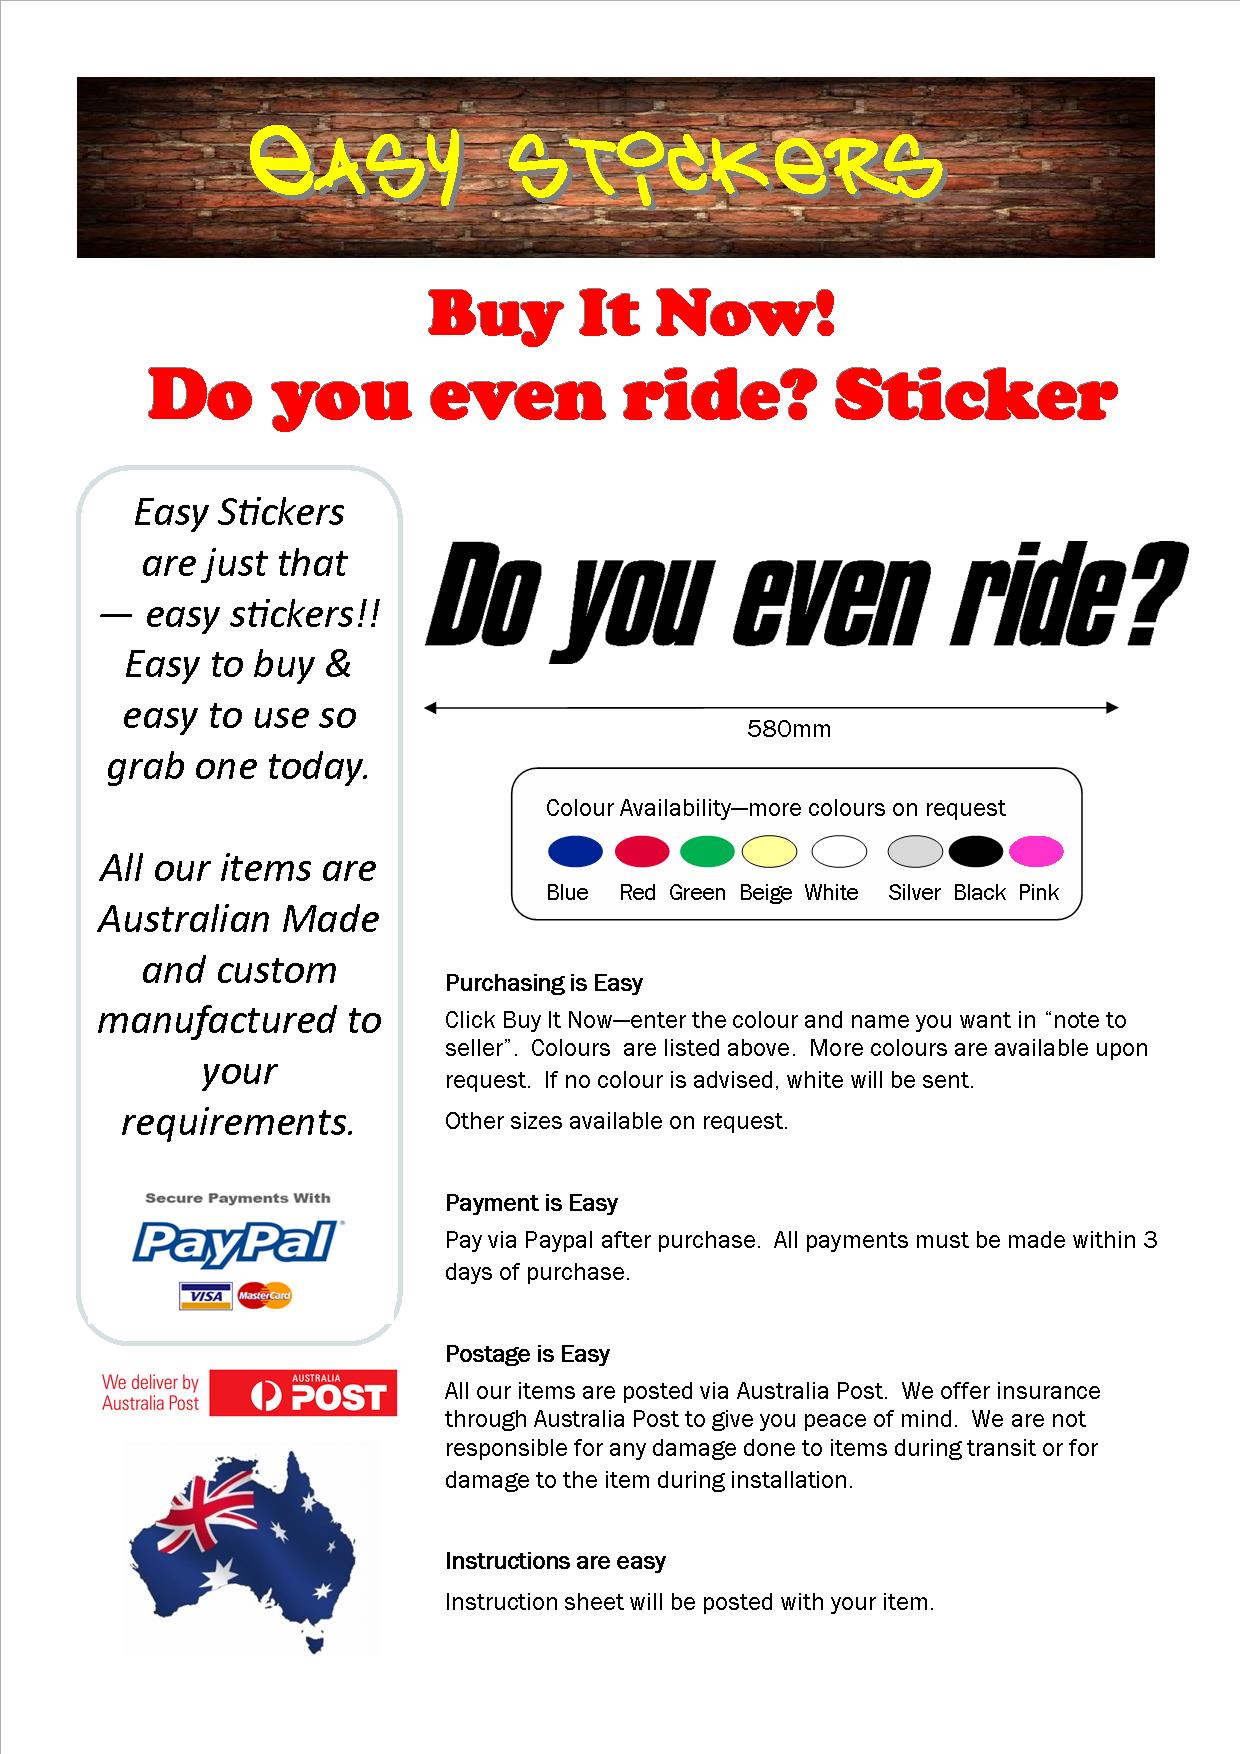 Ebay Template 580mm do you even ride.jpg  by easystickers